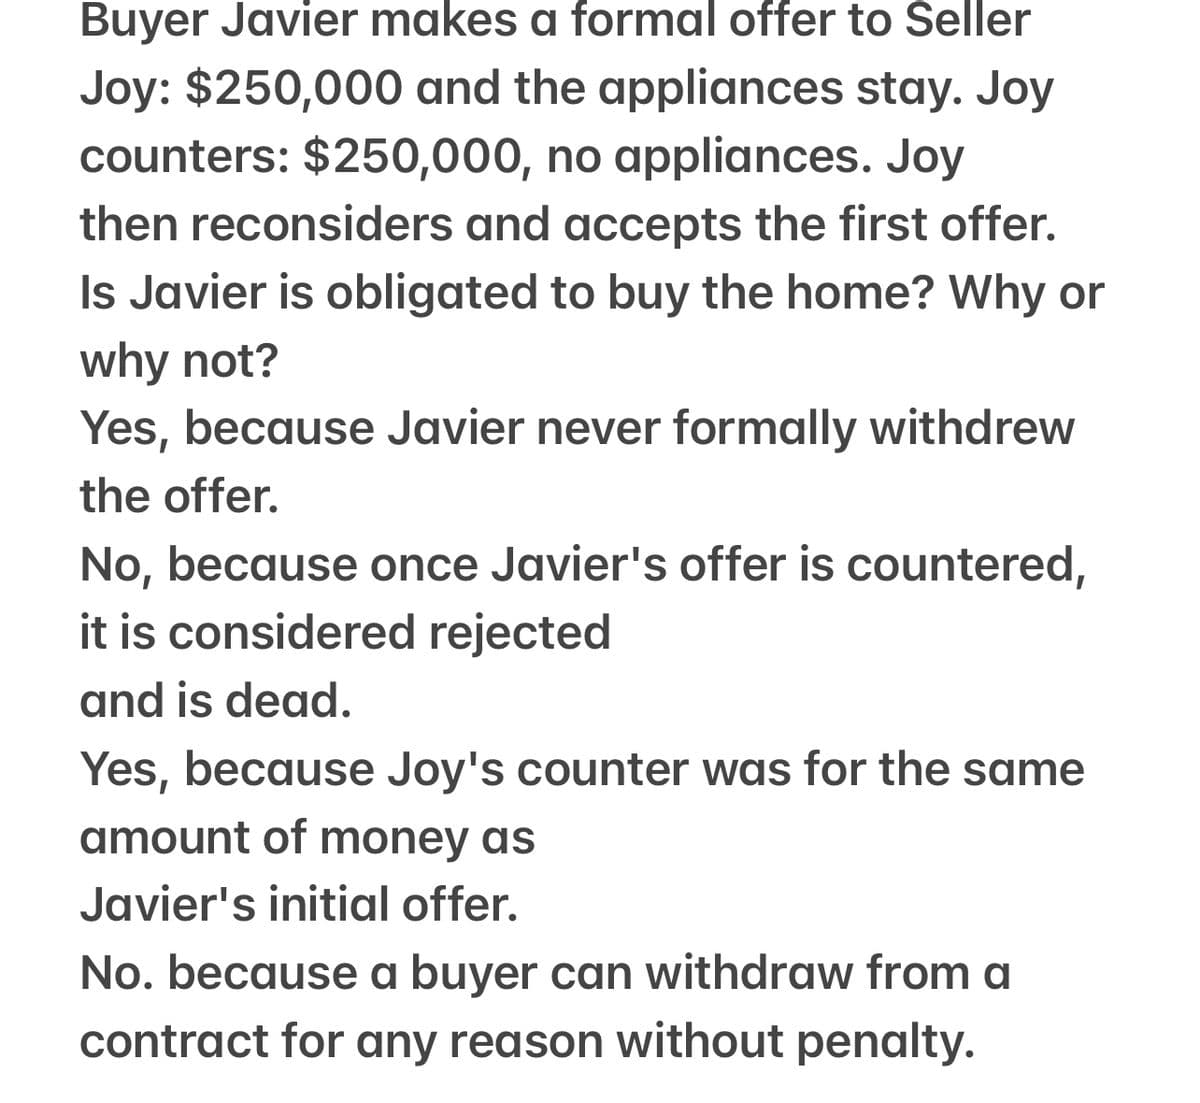 Buyer Javier makes a formal offer to Seller
Joy: $250,000 and the appliances stay. Joy
counters: $250,000, no appliances. Joy
then reconsiders and accepts the first offer.
Is Javier is obligated to buy the home? Why or
why not?
Yes, because Javier never formally withdrew
the offer.
No, because once Javier's offer is countered,
it is considered rejected
and is dead.
Yes, because Joy's counter was for the same
amount of money as
Javier's initial offer.
No. because a buyer can withdraw from a
contract for any reason without penalty.